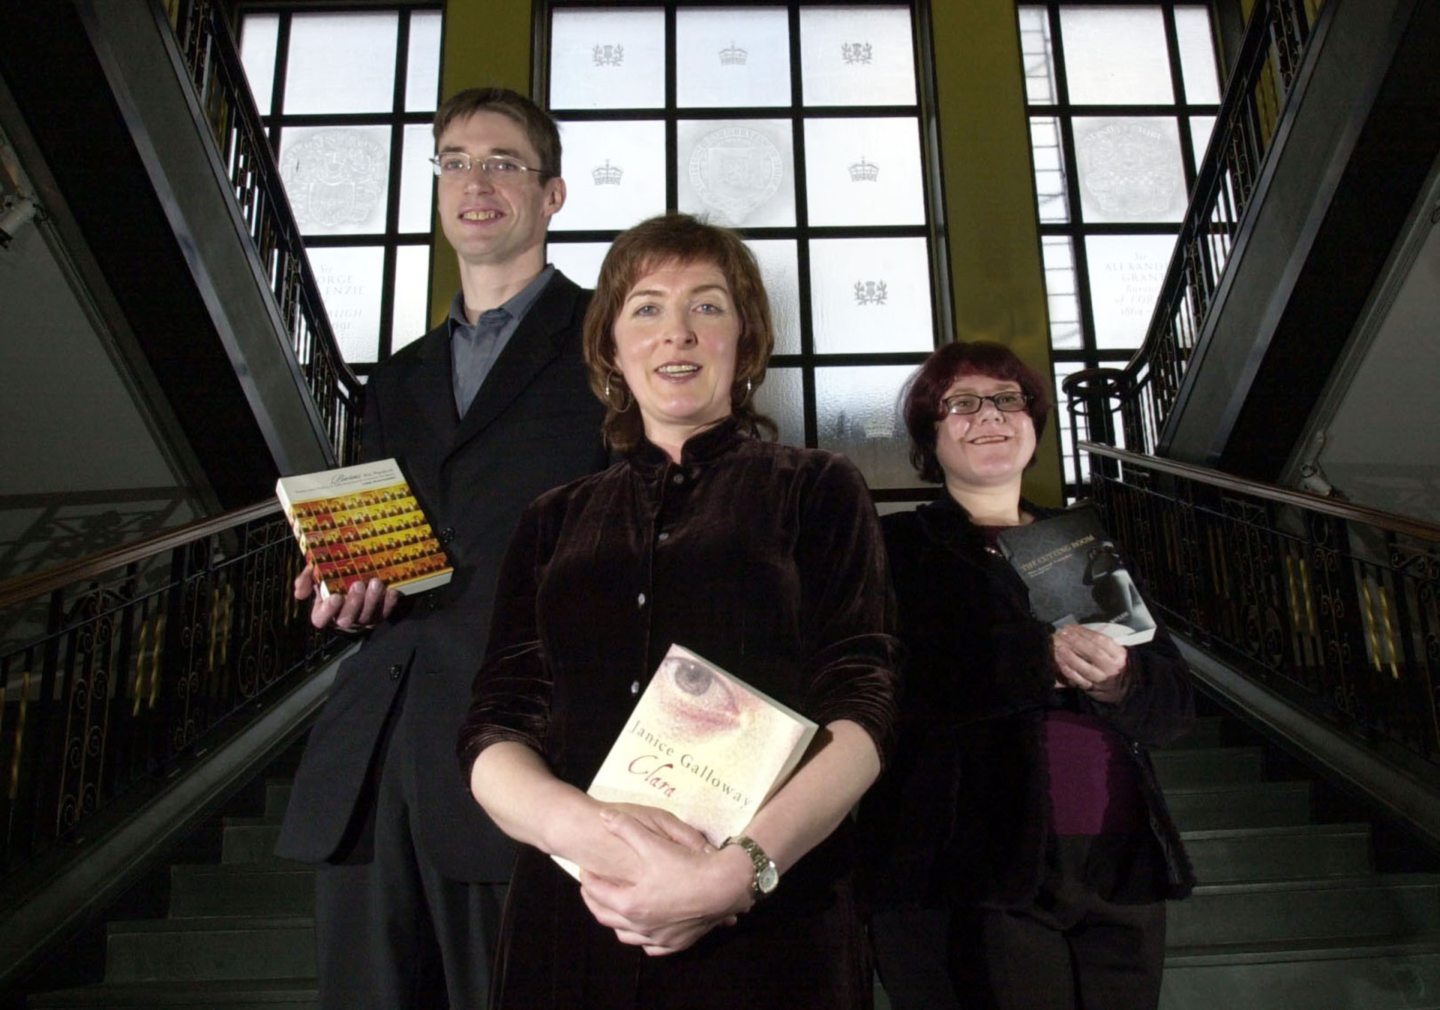  Liam McIlvanney, Janice Galloway and Louise Welsh.